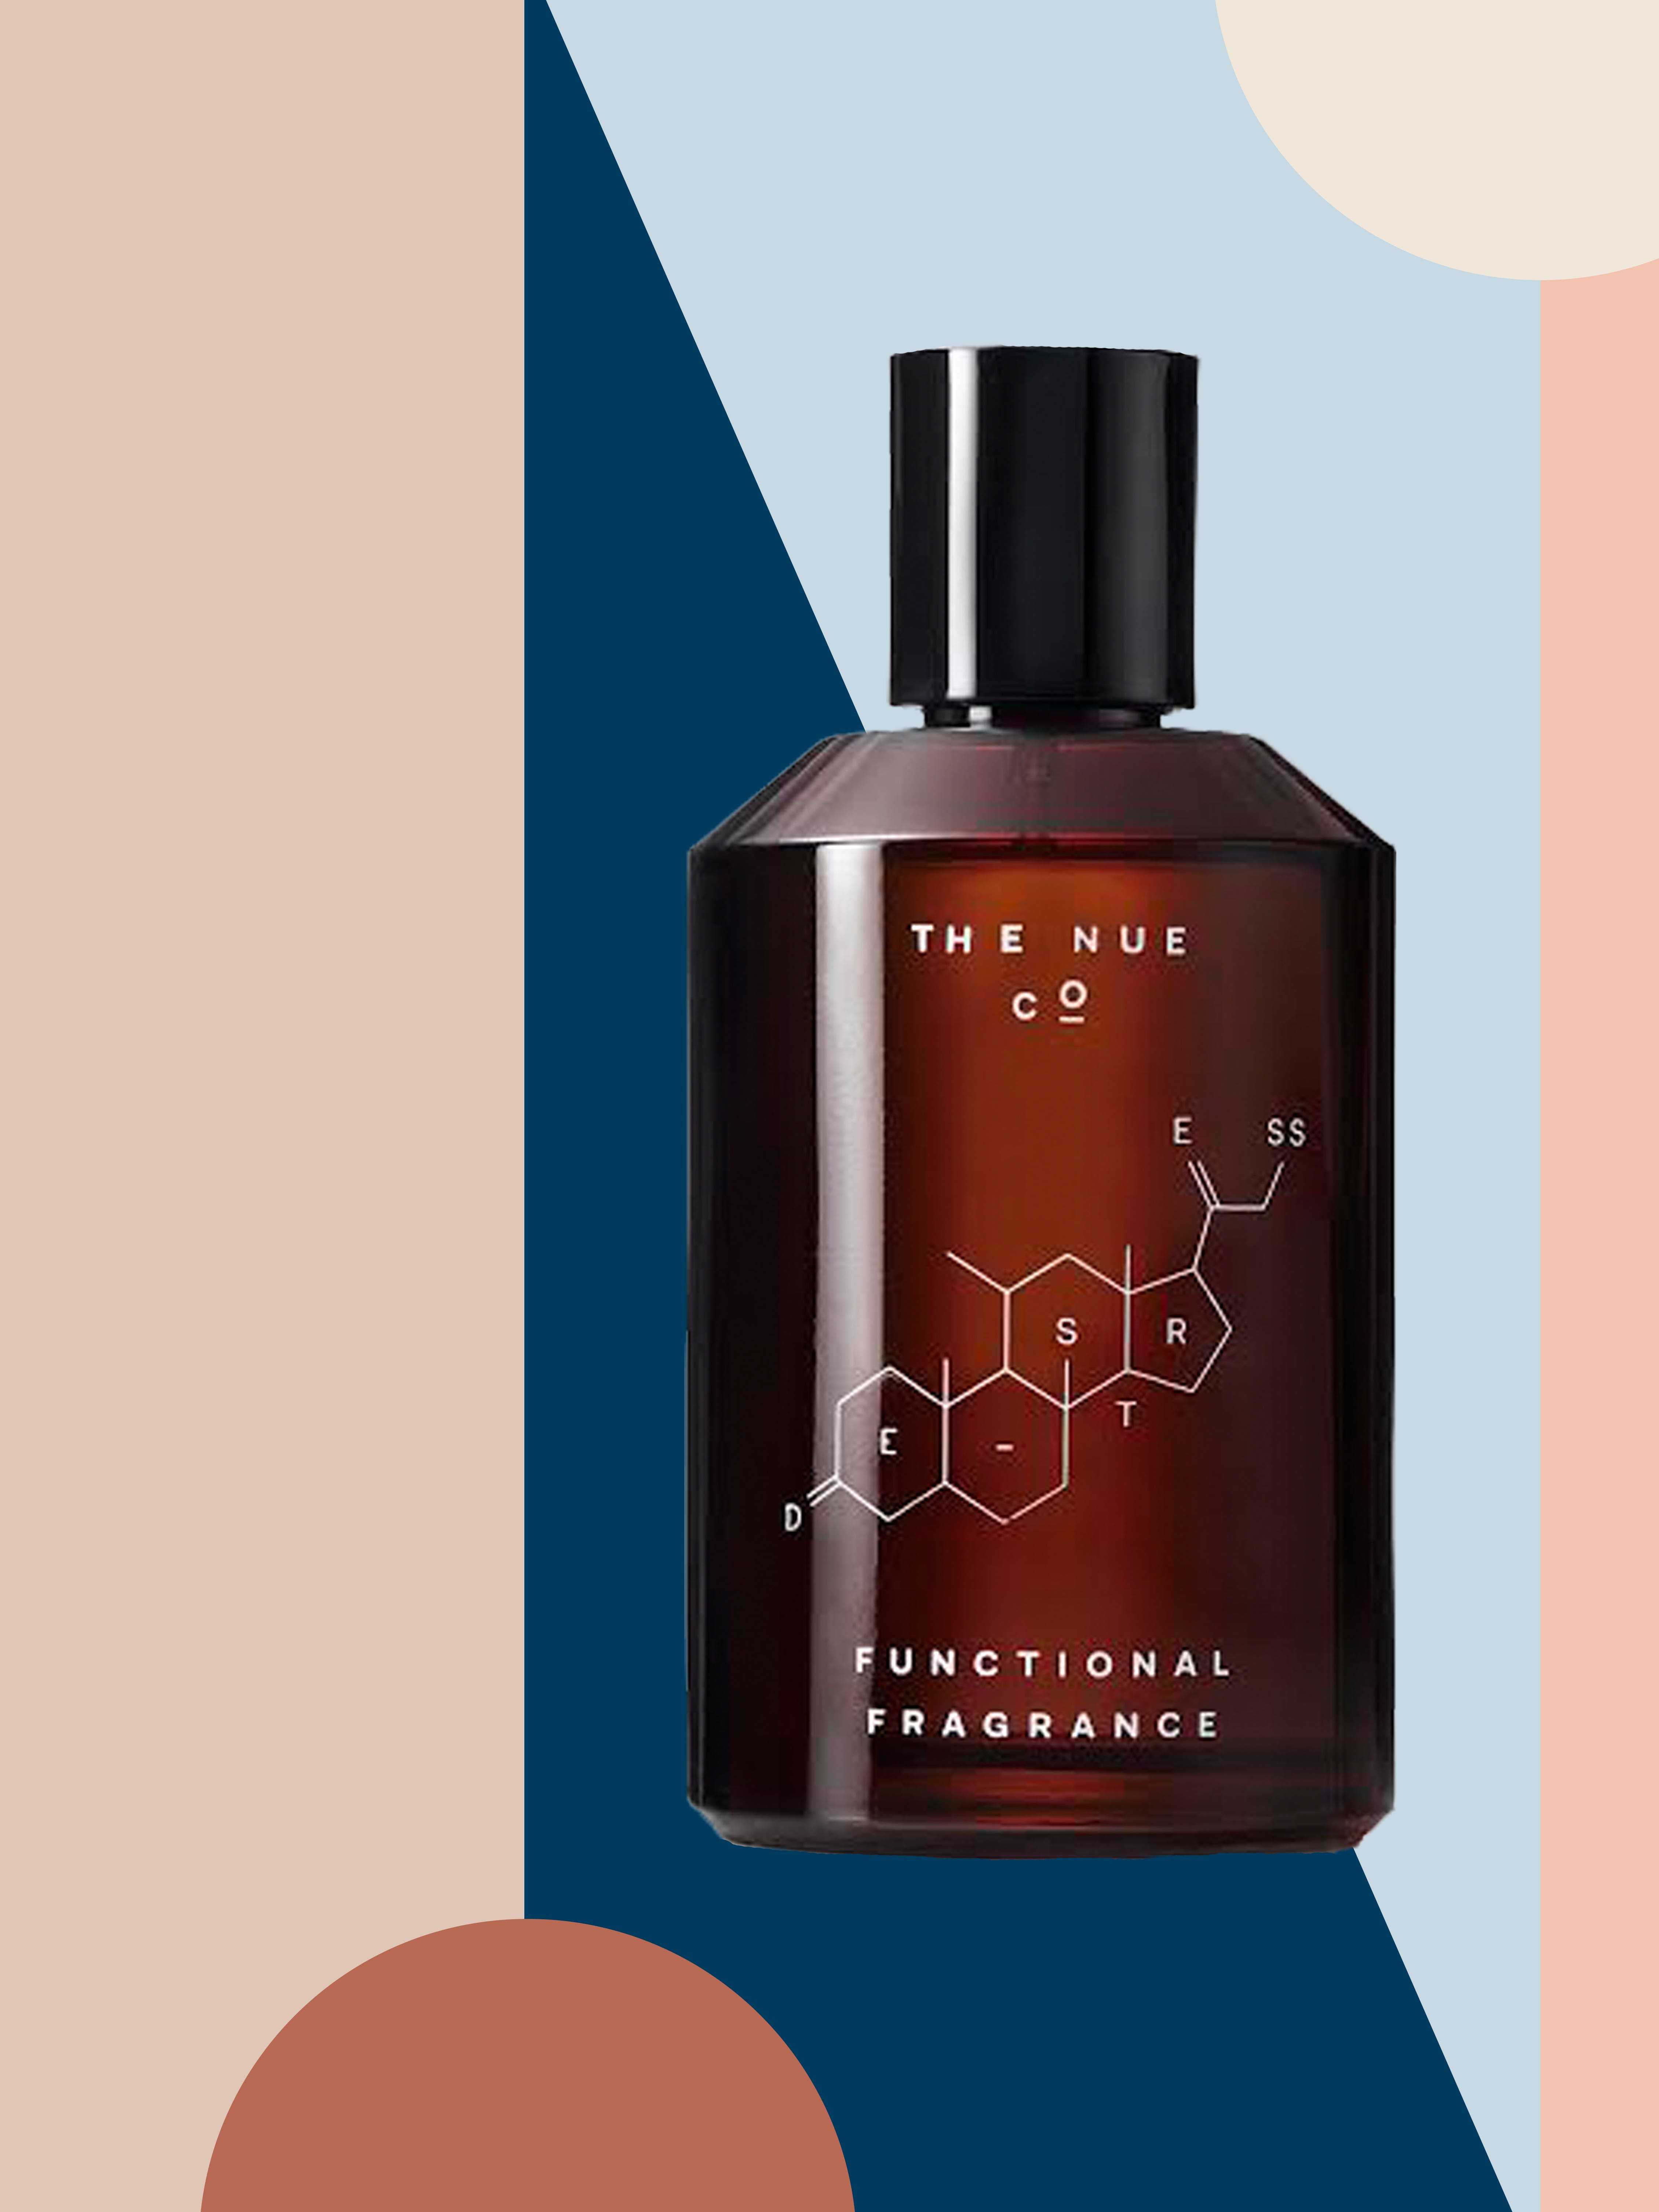 It’s True: This Science-Backed Fragrance Dissolves Stress in Minutes